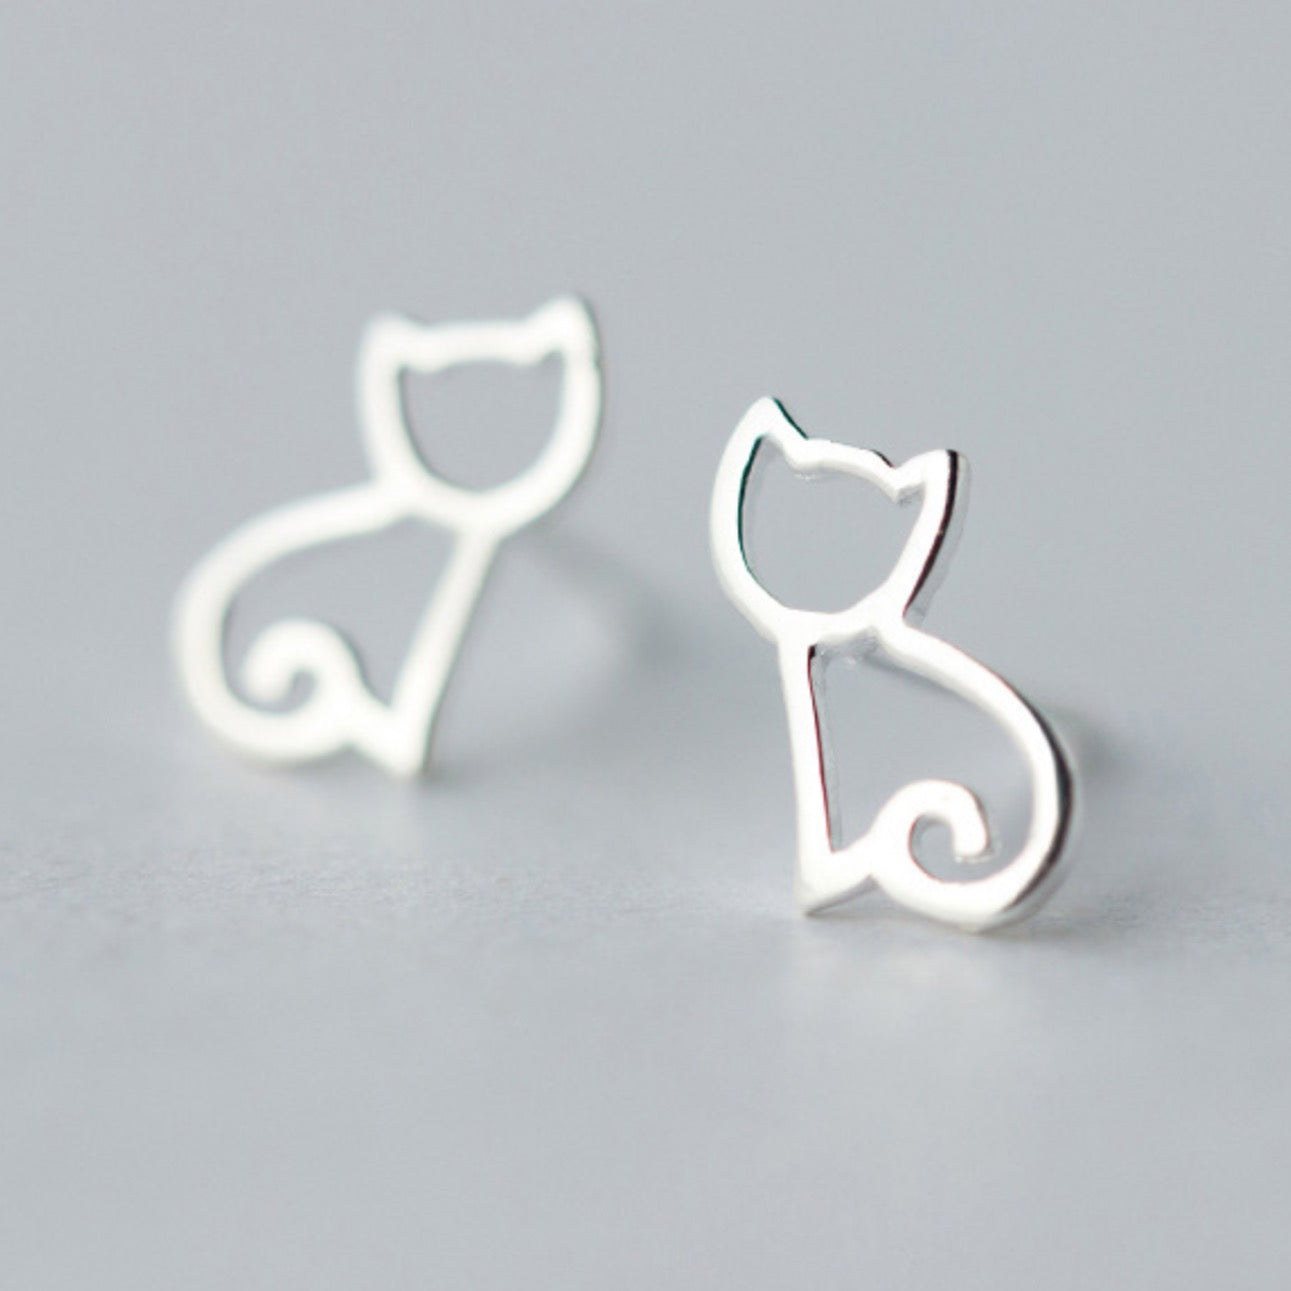 Silver stud earrings with a minimalist cat outline design